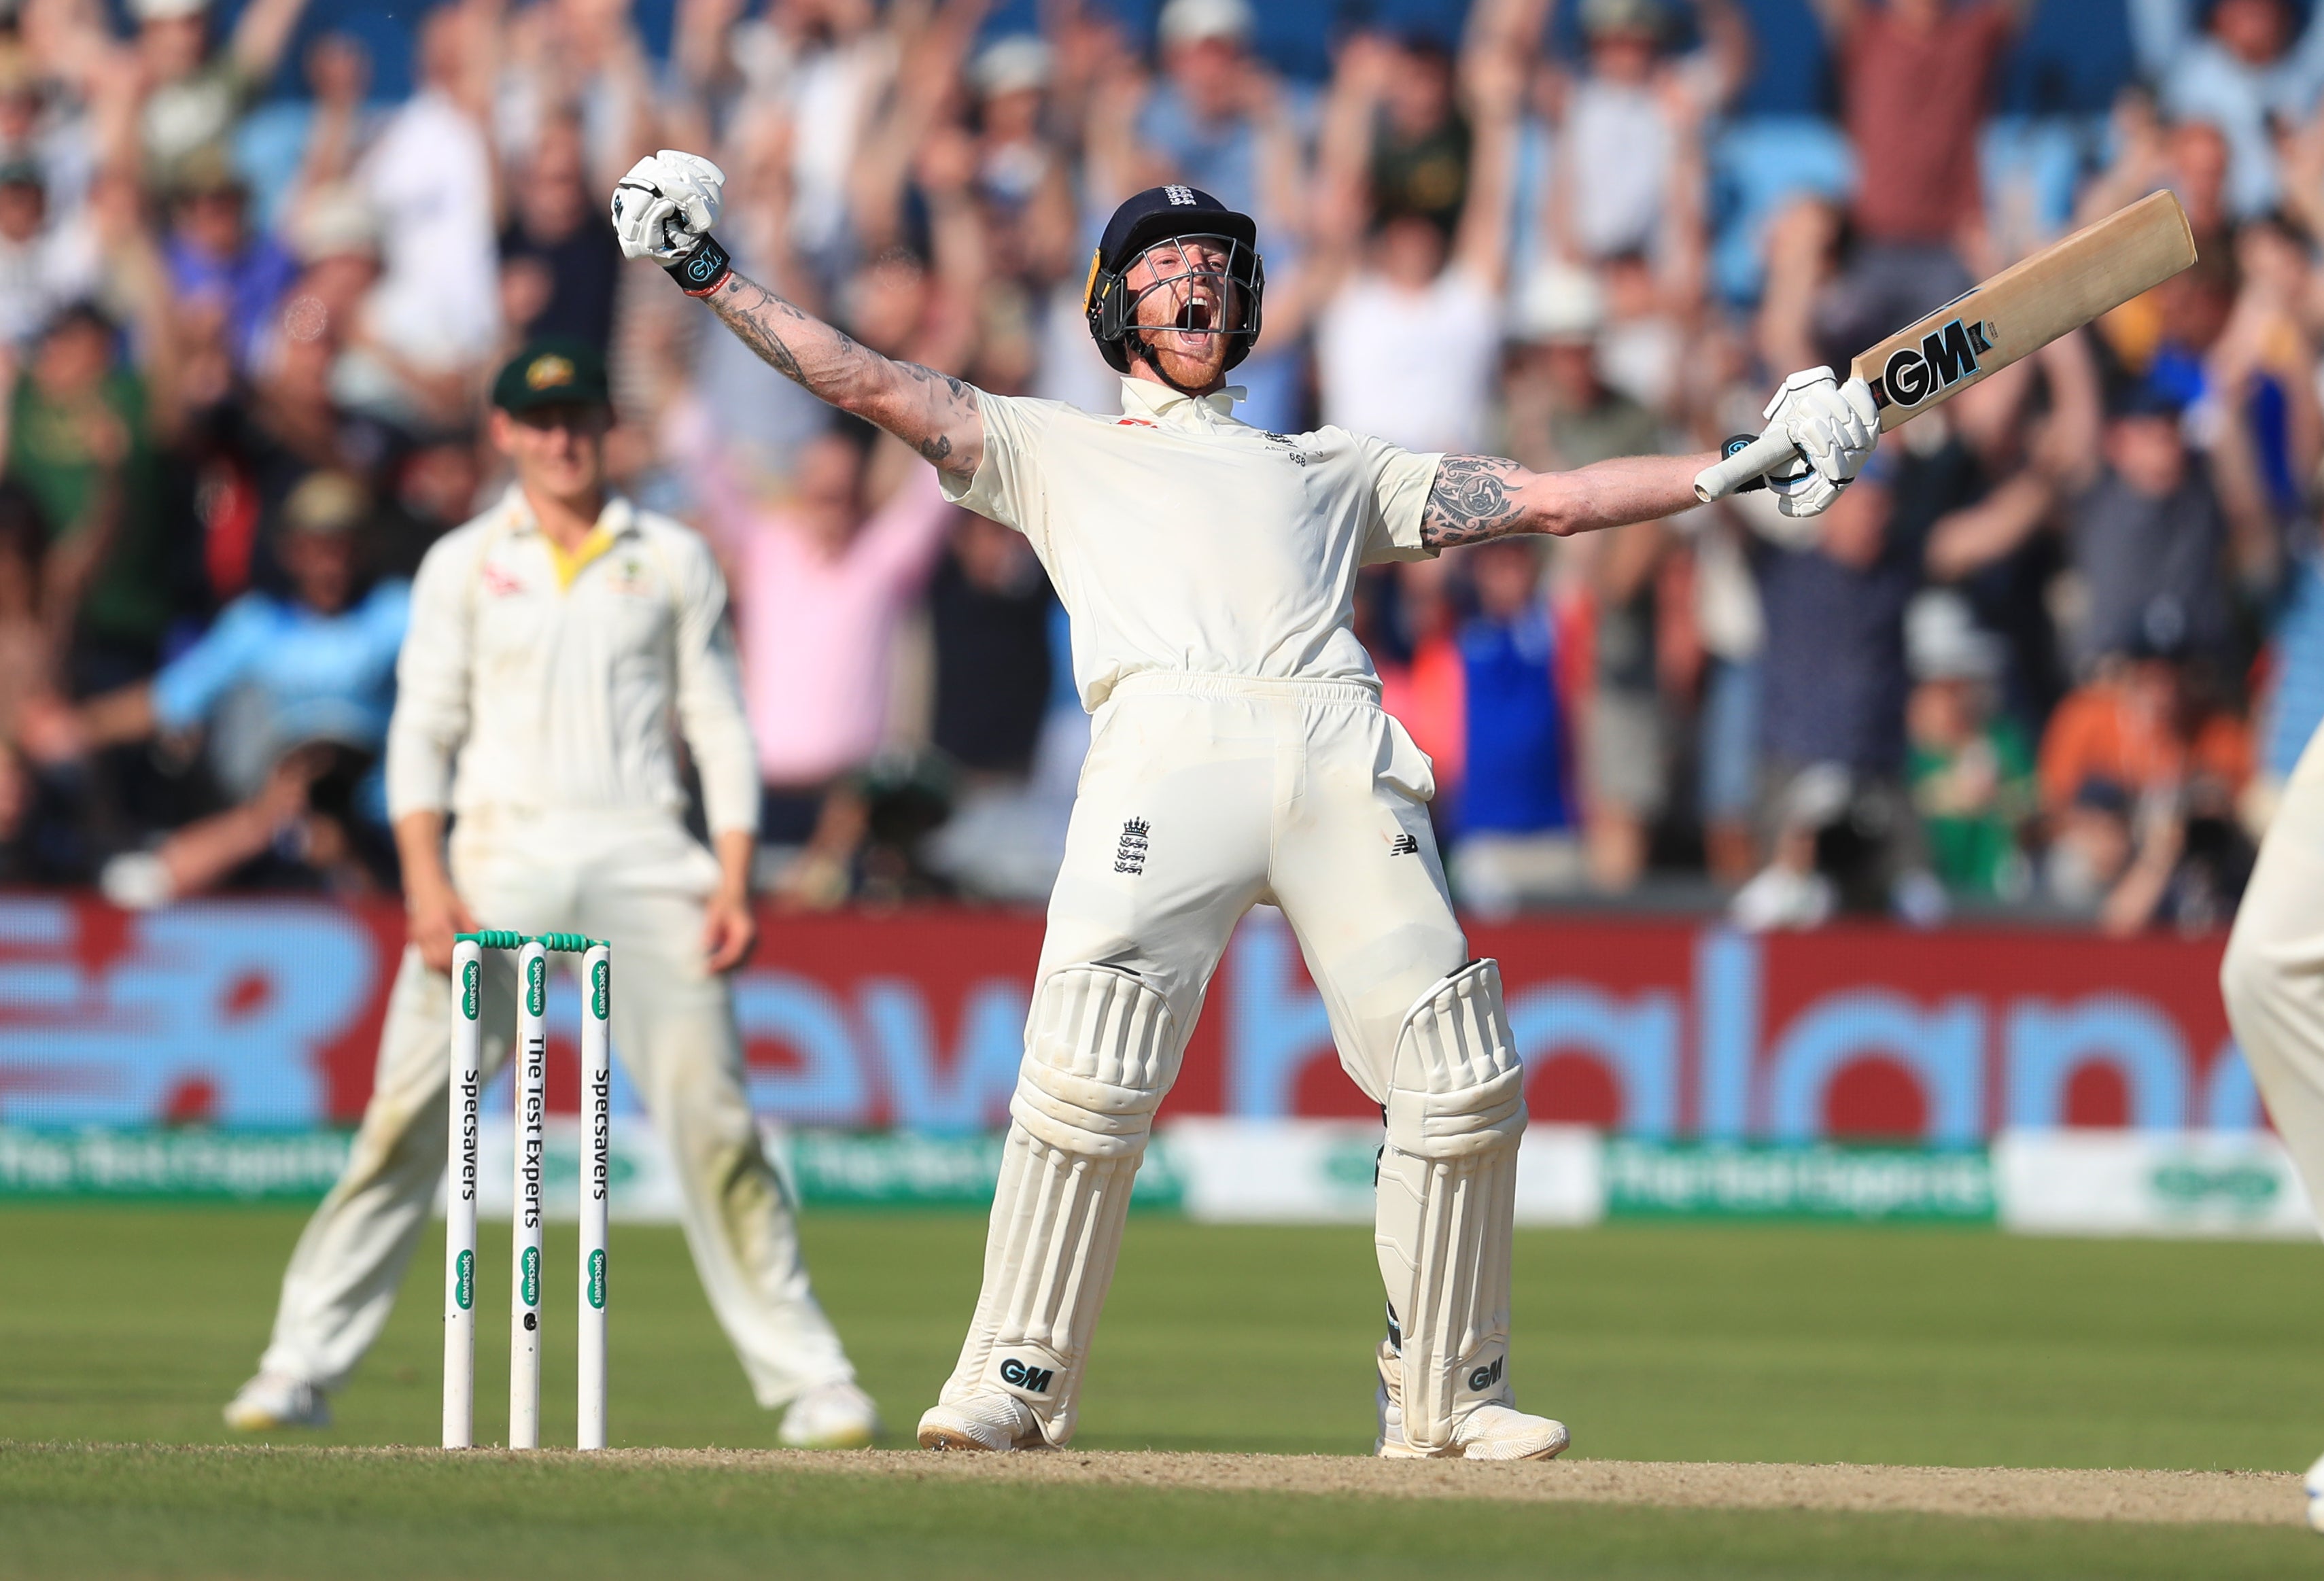 Ben Stokes produced one of the greatest innings of all time at Headingley (Mike Egerton/PA)